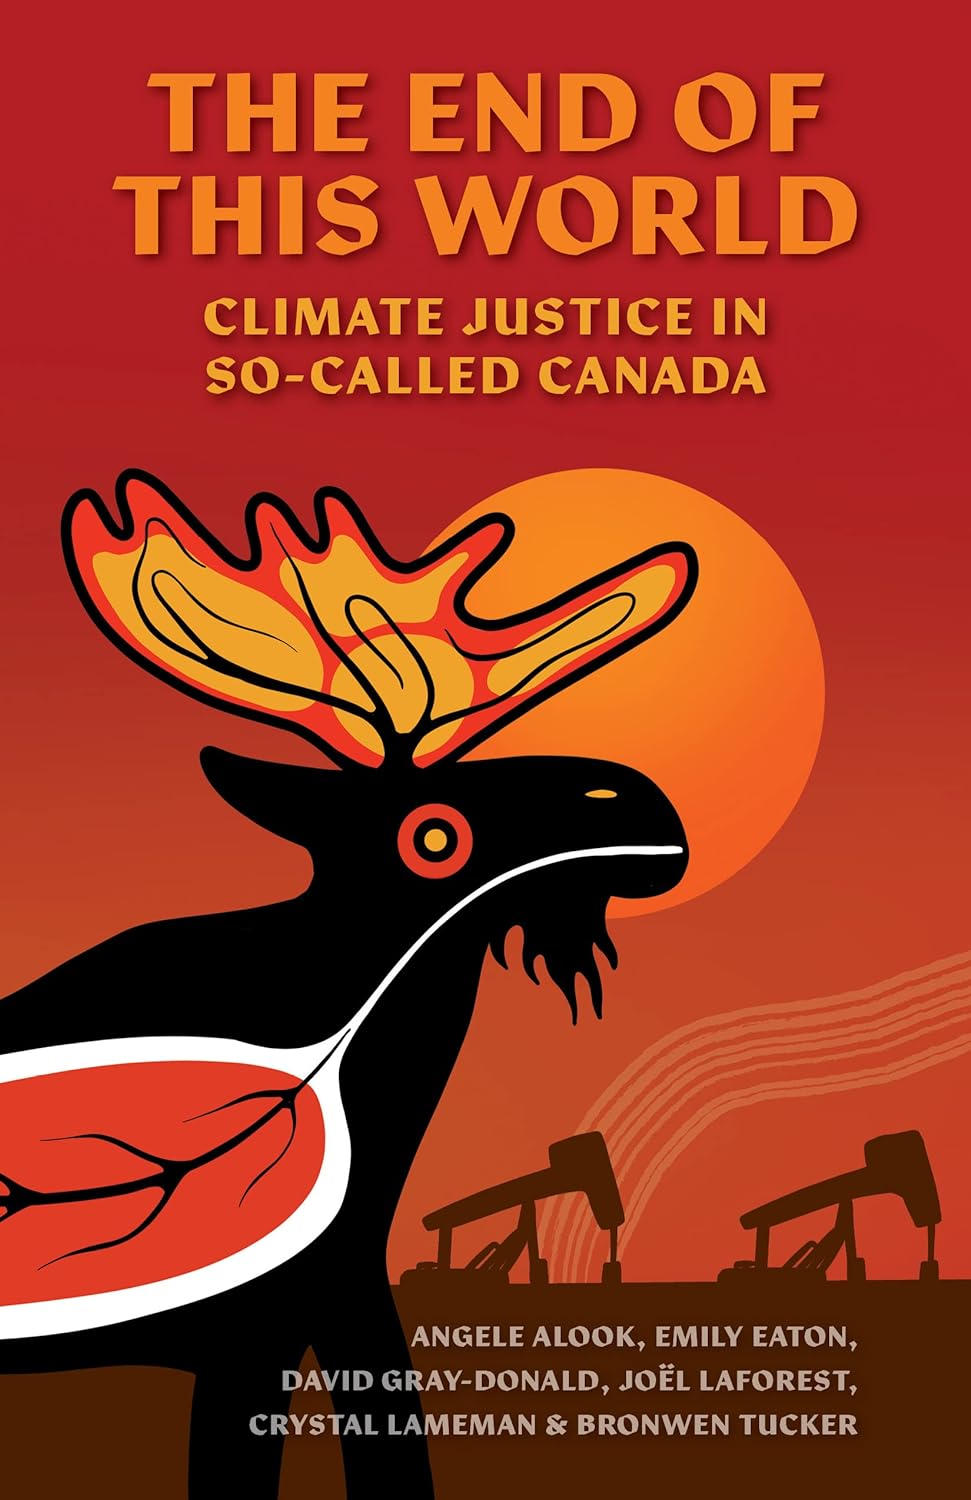 The End of This World: Climate Justice in So-Called Canada by Angele Alook et. al